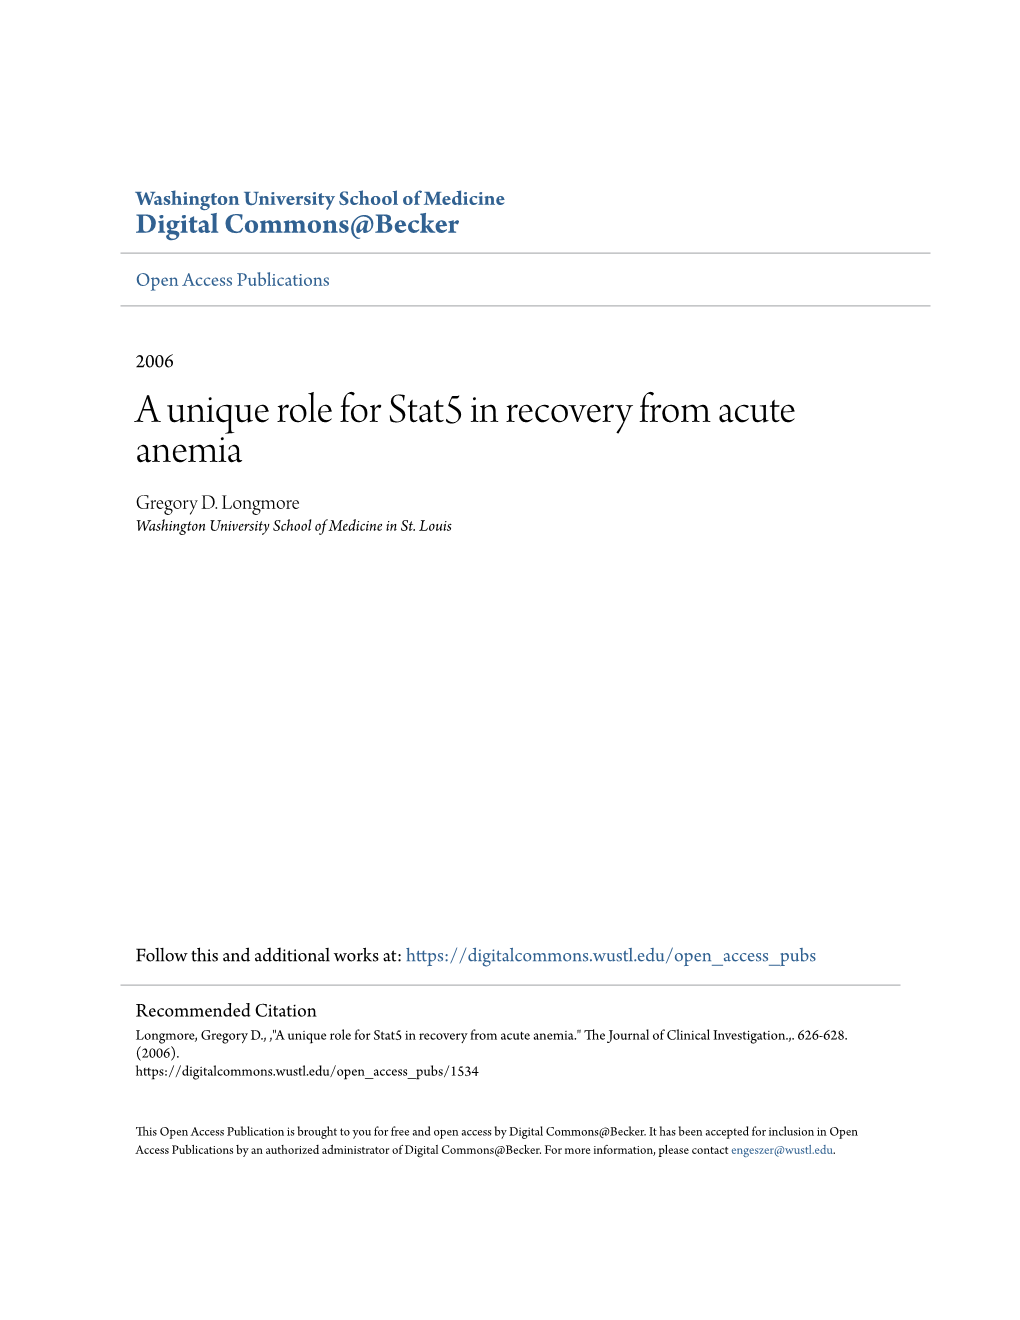 A Unique Role for Stat5 in Recovery from Acute Anemia Gregory D